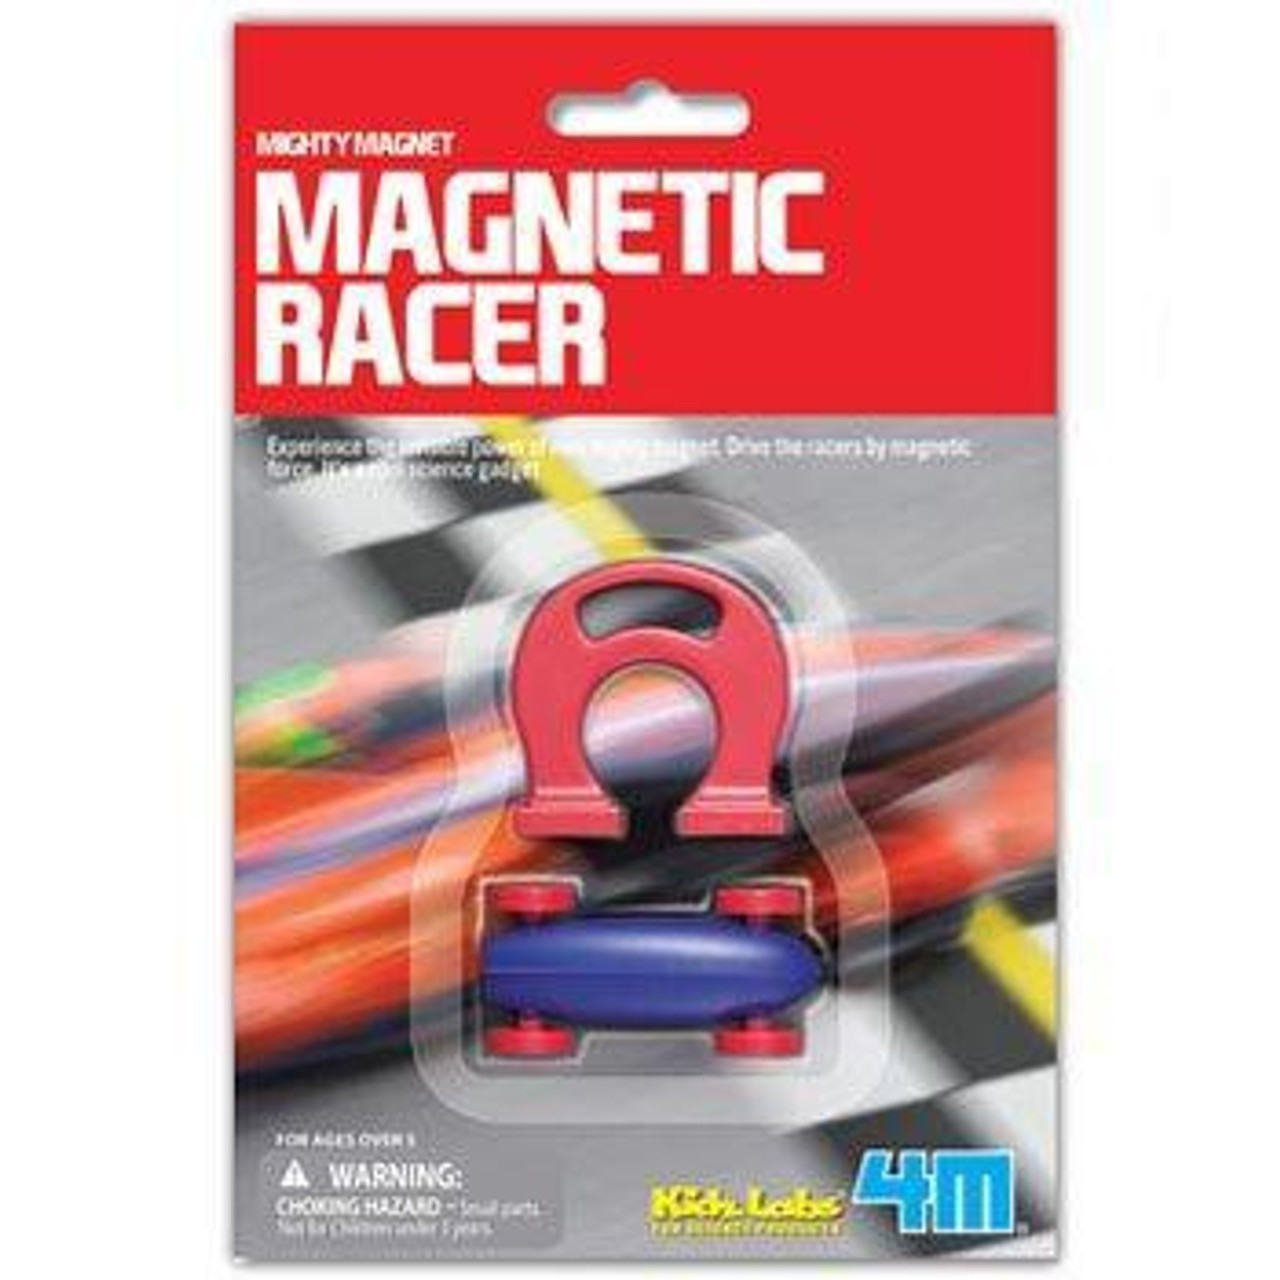 MIGHTY MAGNET MAGNECTIC RACER